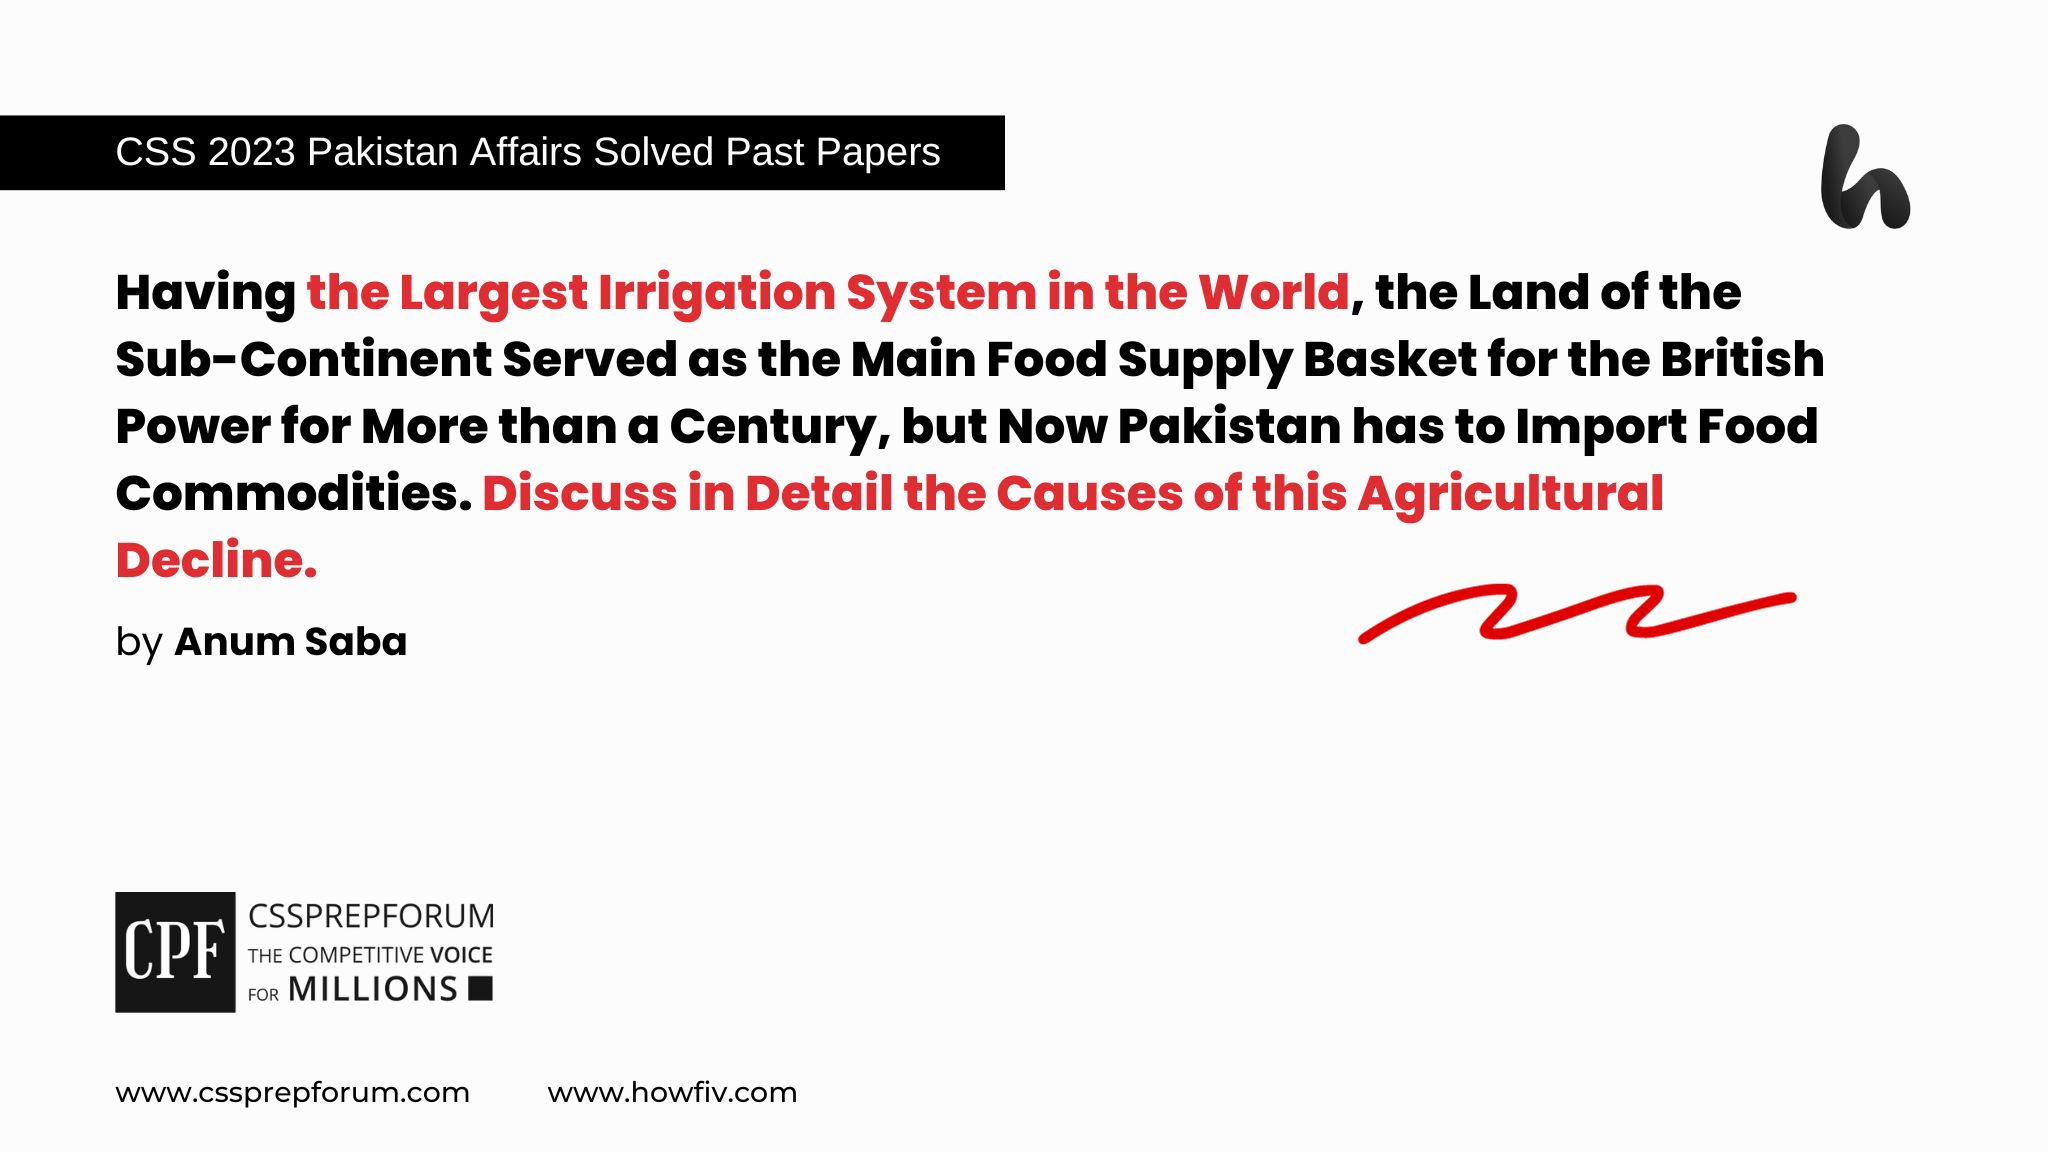 Having the Largest Irrigation System in the World, the Land of the Sub-Continent Served as the Main Food Supply Basket for the British Power for More than a Century, but Now Pakistan has to Import